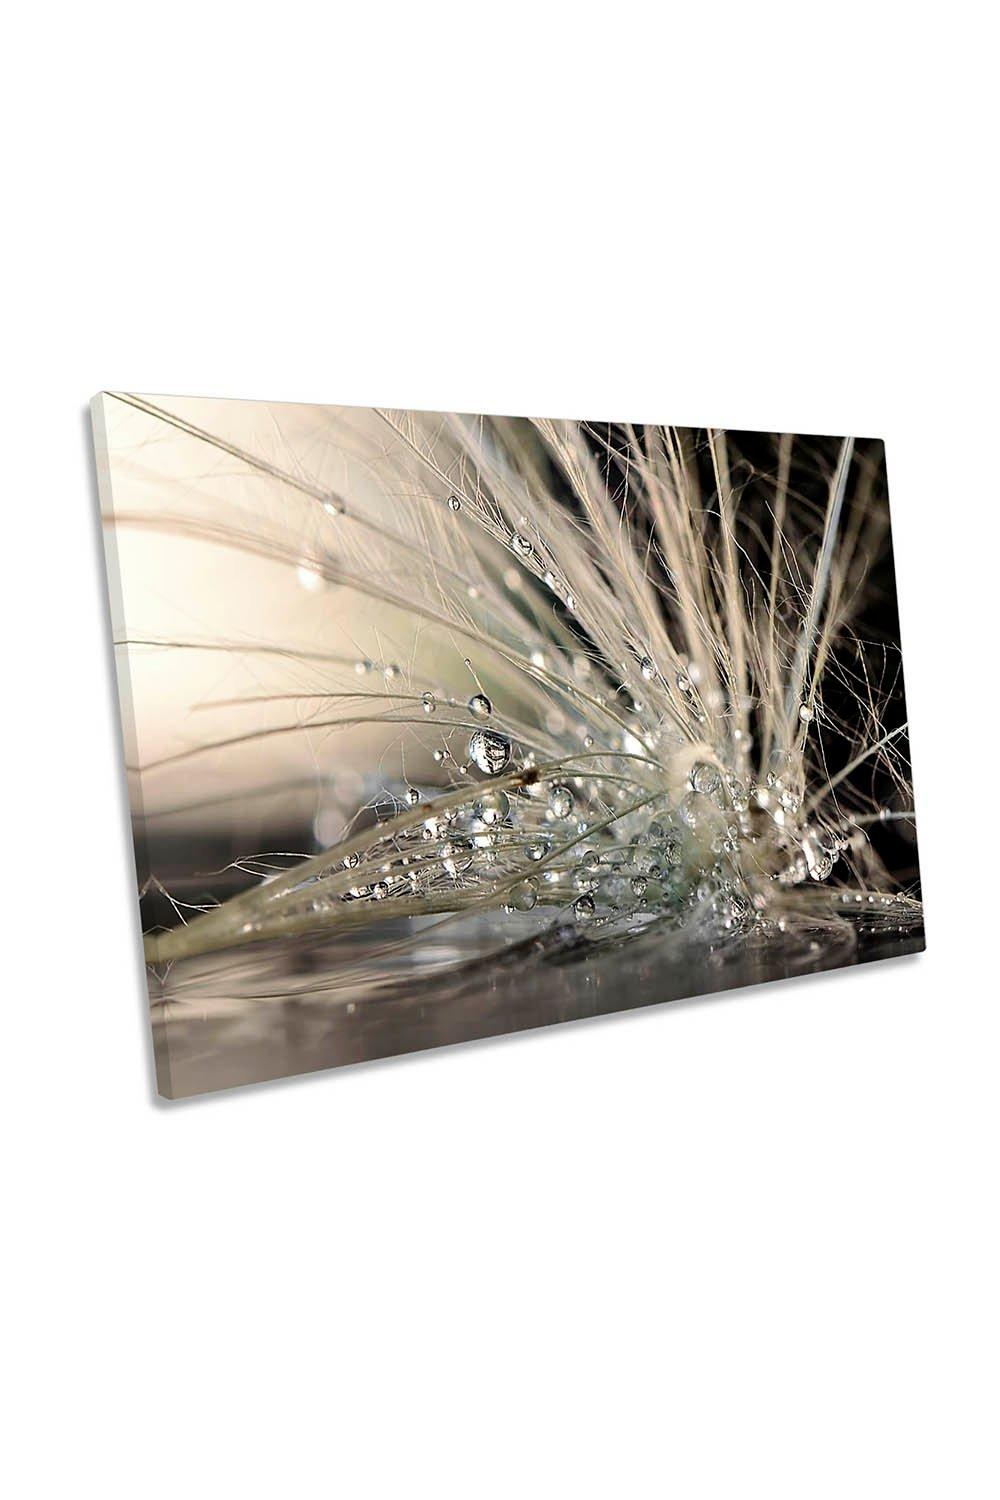 Pearl Drops Feather Floral Canvas Wall Art Picture Print